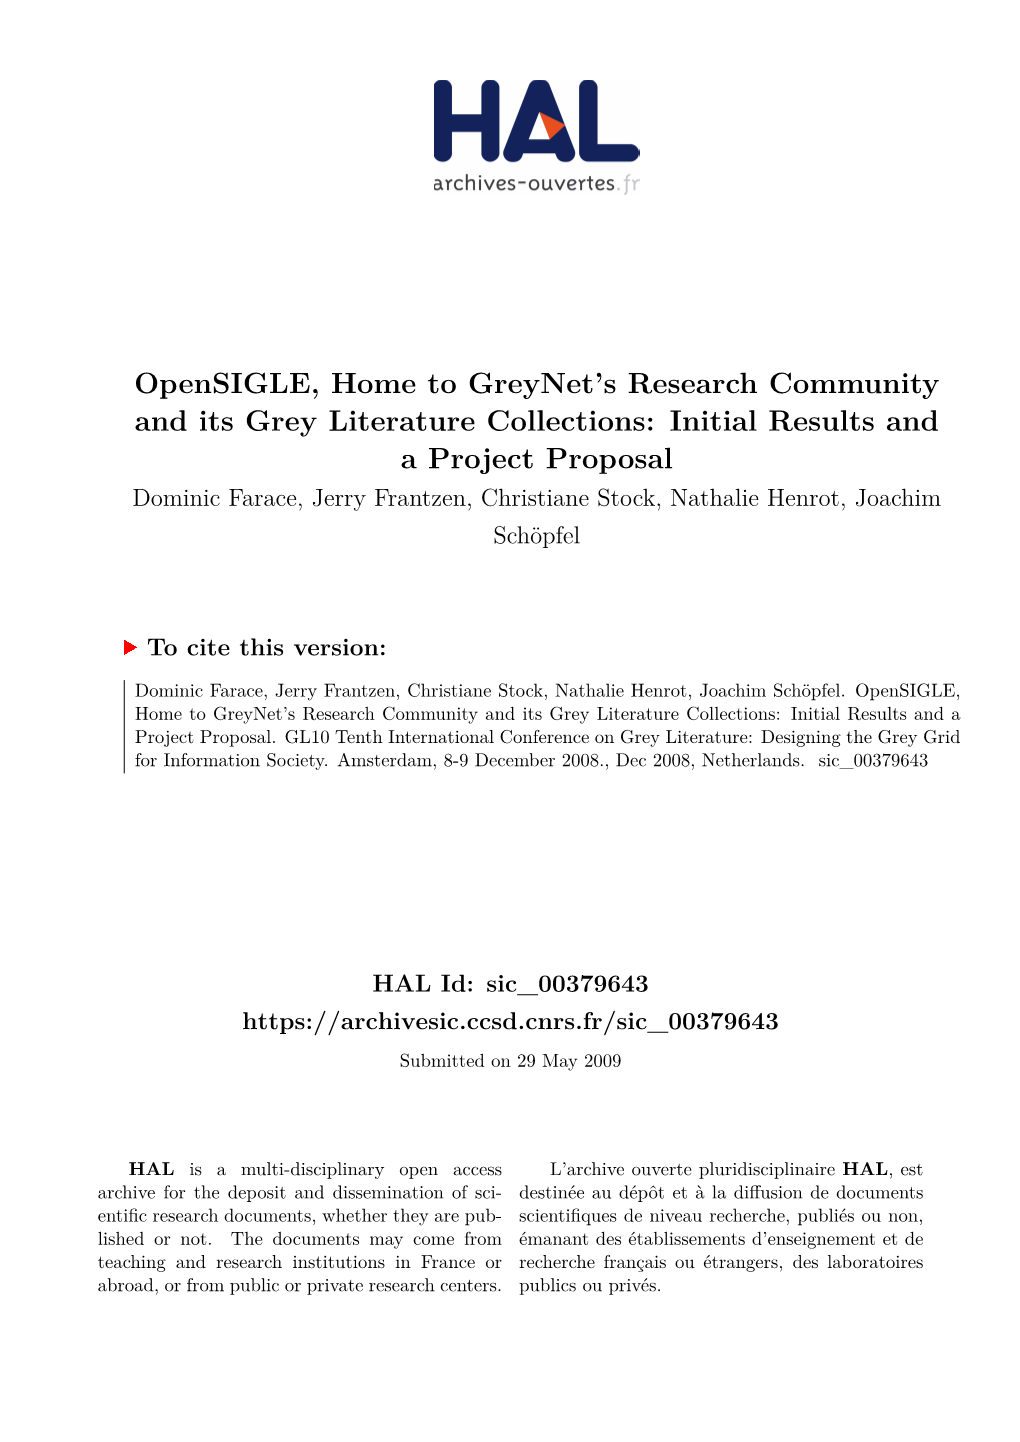 Opensigle, Home to Greynet's Research Community